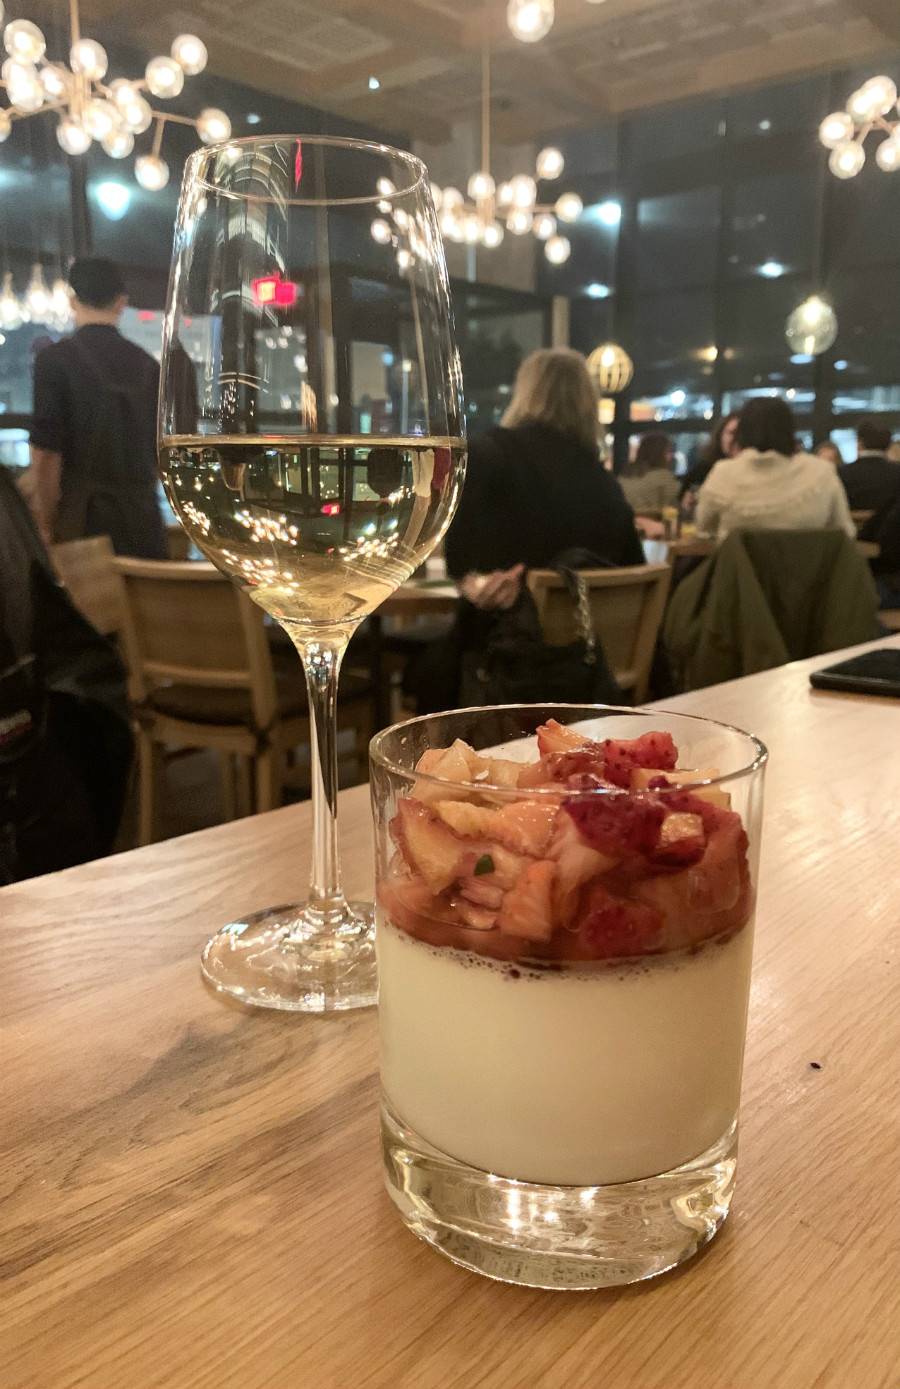 A tumbler glass is half filled with vanilla panna cotta at NAYA. Mascerated strawberries are piled on top and near the top of the glass. Behind the panna cotta is a glass of white wine. Both glasses sit on a light colored wood table. Photo by Stephanie Wheatley. 